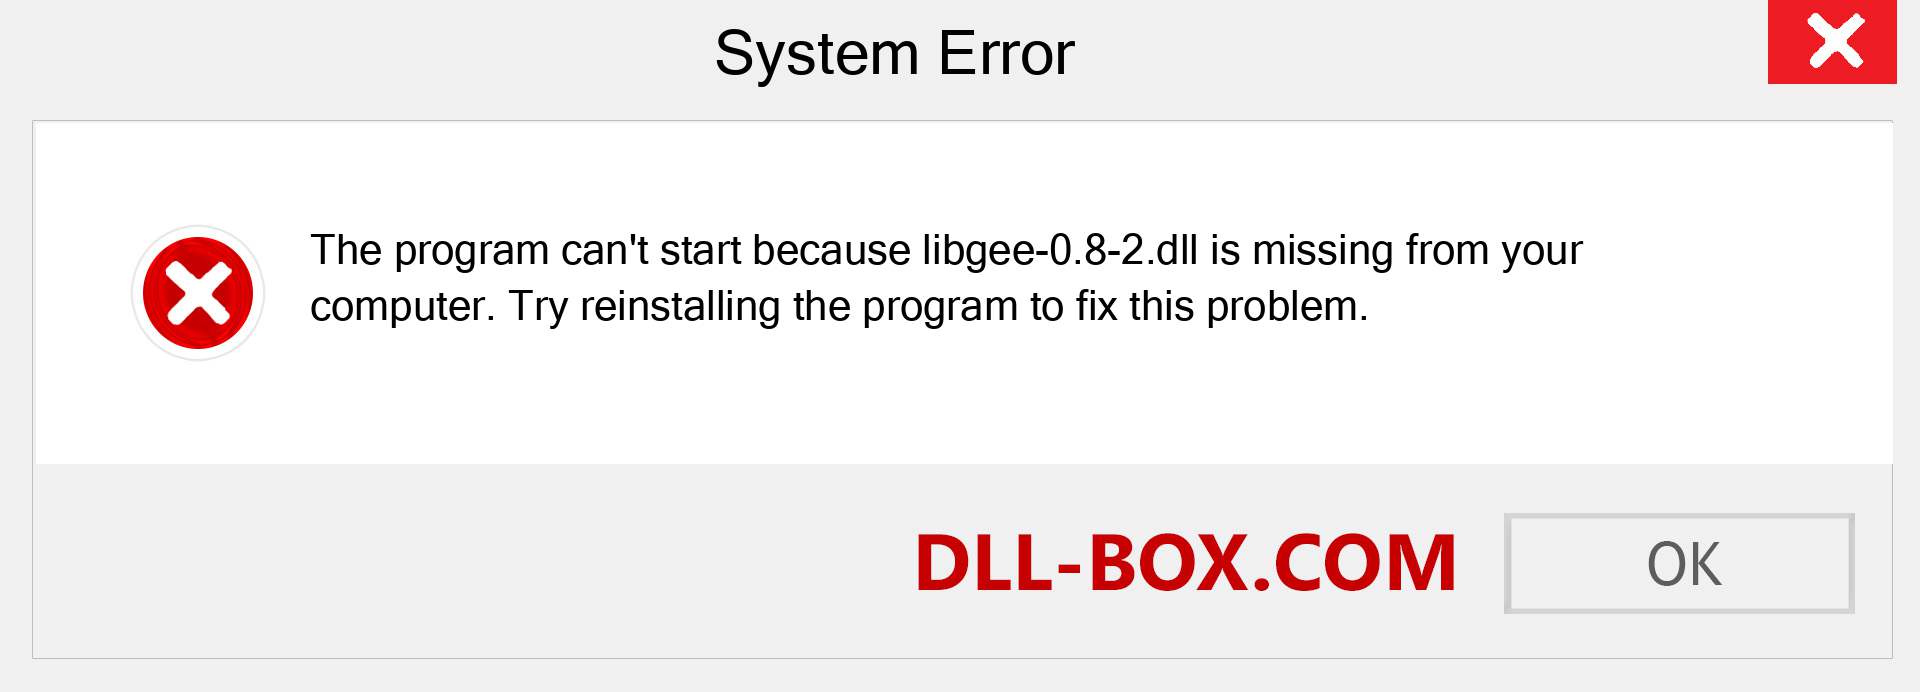  libgee-0.8-2.dll file is missing?. Download for Windows 7, 8, 10 - Fix  libgee-0.8-2 dll Missing Error on Windows, photos, images